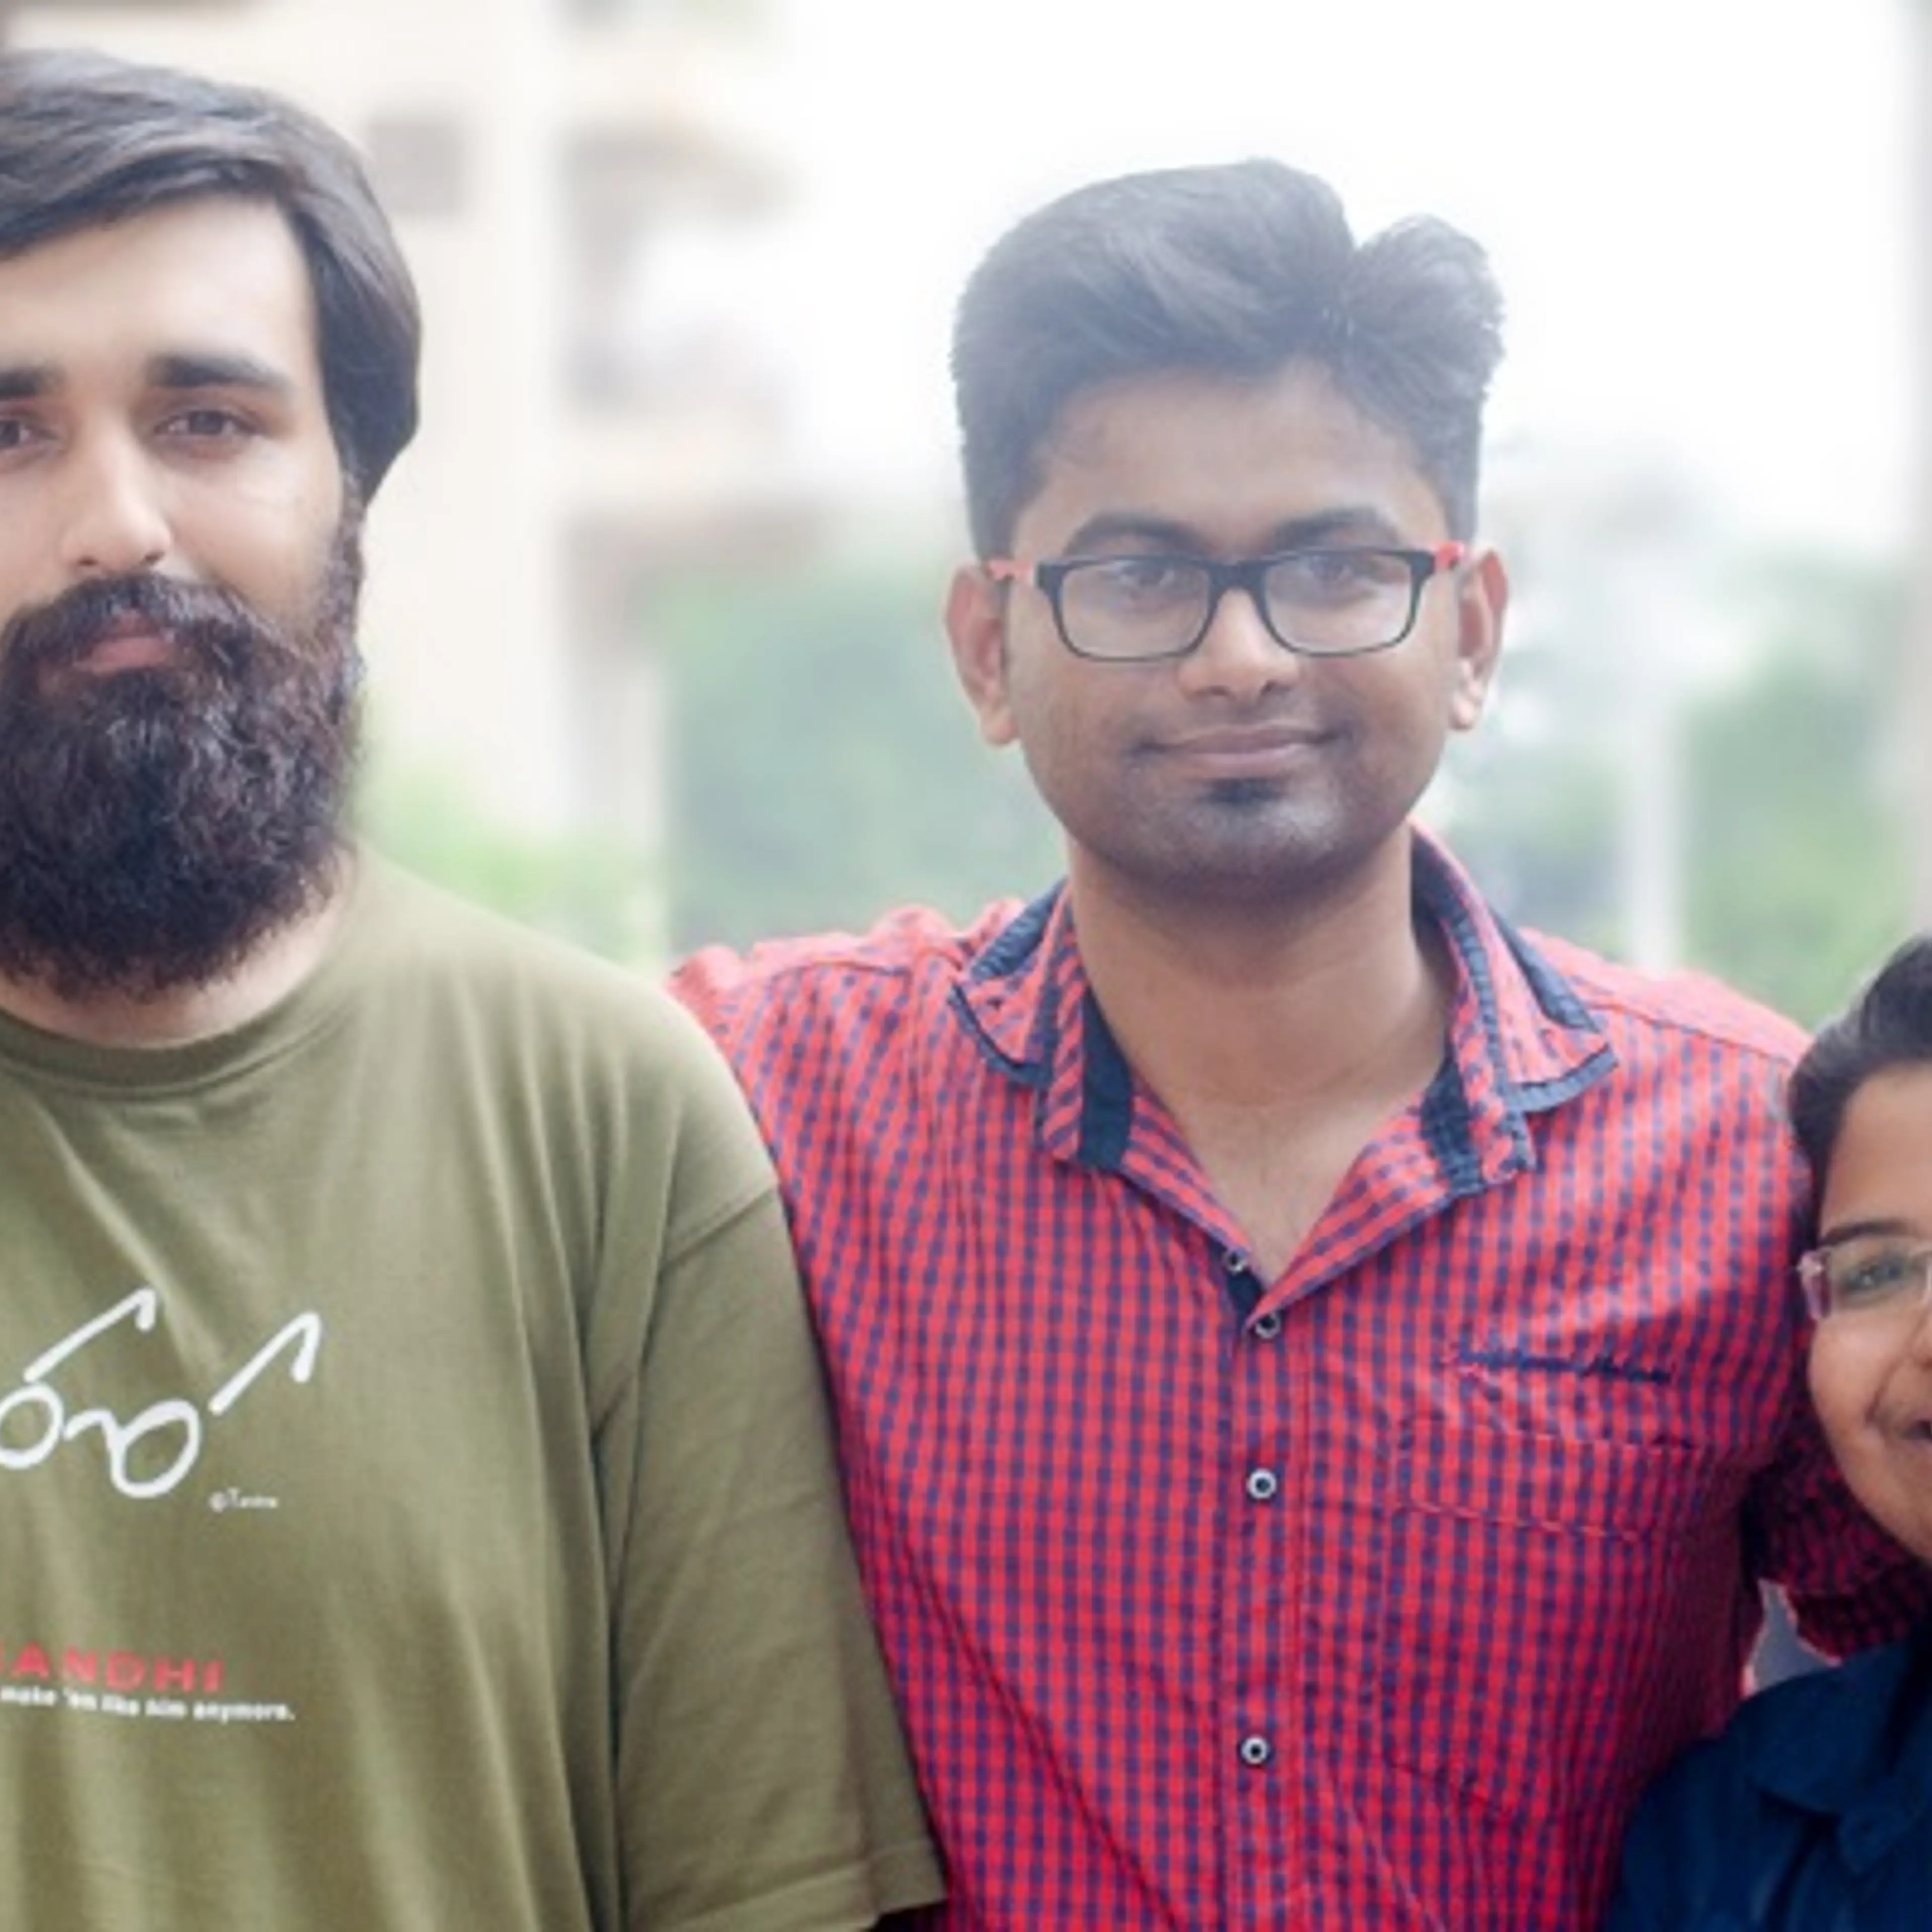 Breaking a Limca record, these 23-year-olds are now trying to organise the photography market in India